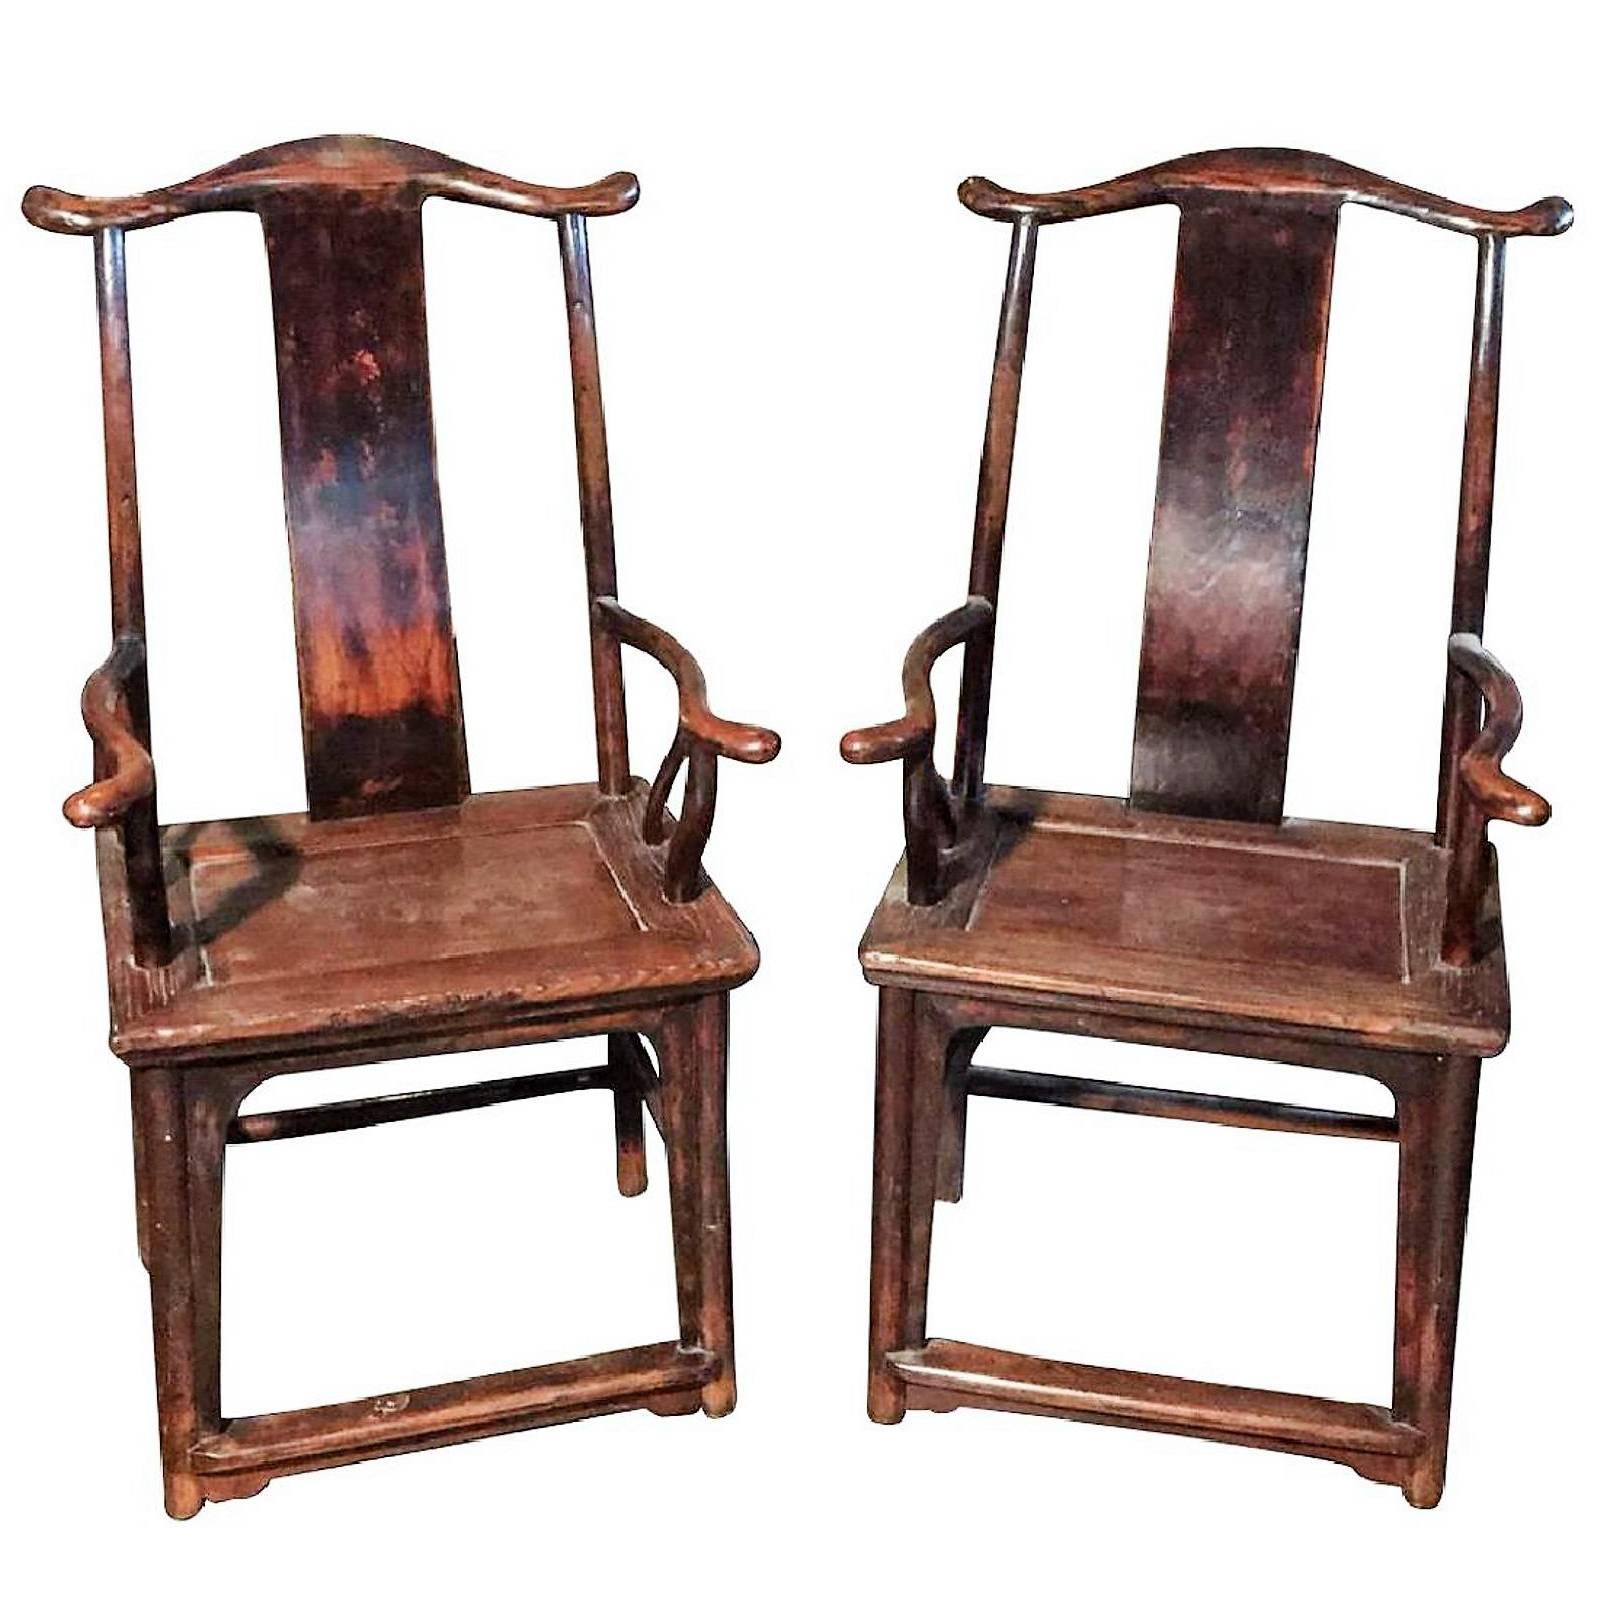 Antique Pair of Chinese Qing Dynasty Style Elmwood Open Armchairs, circa 1860